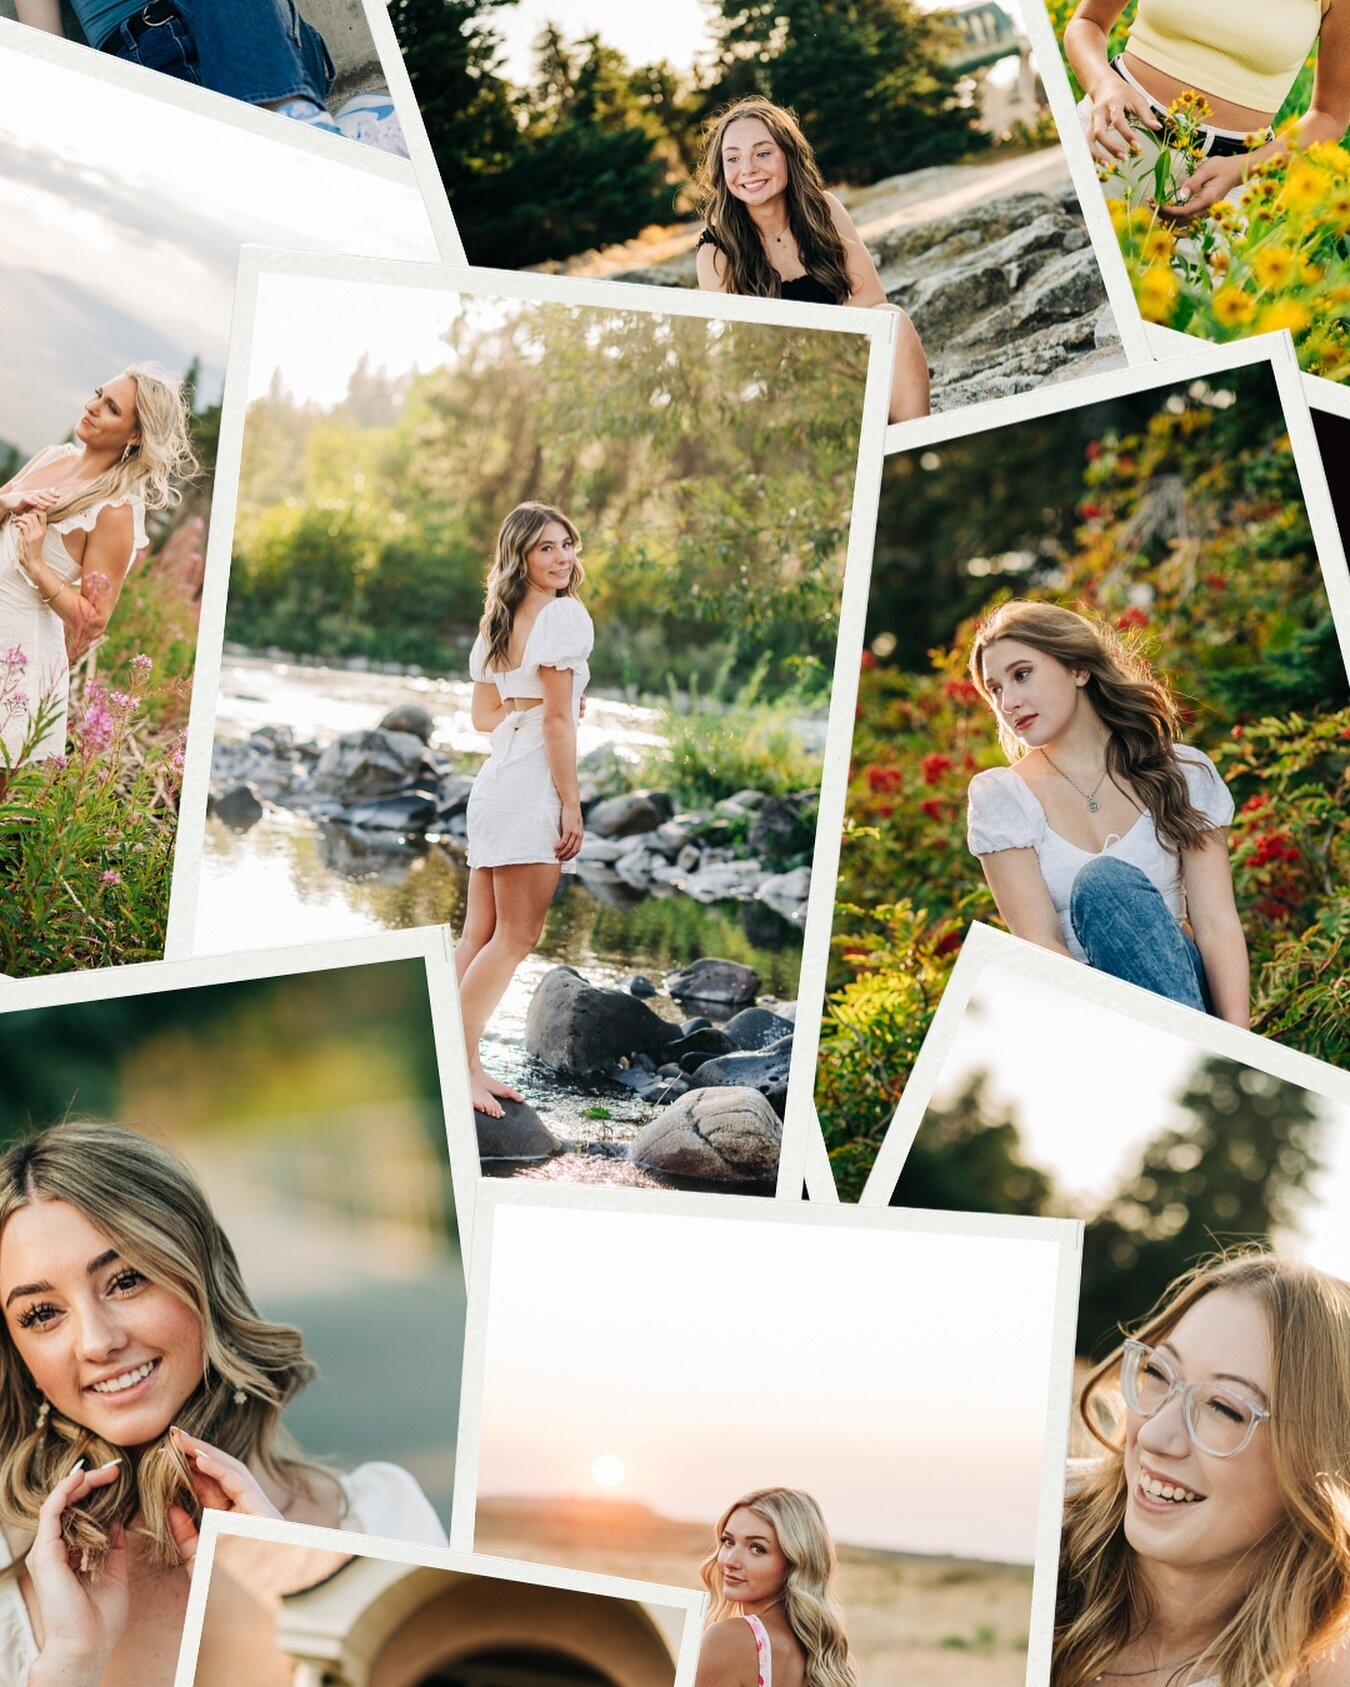 Register for your Class of 2025 senior session at 9am TODAY! Link in profile in 30 minutes! 📷 #kcenglandphotography #spokanephotographer #senior #classof2025